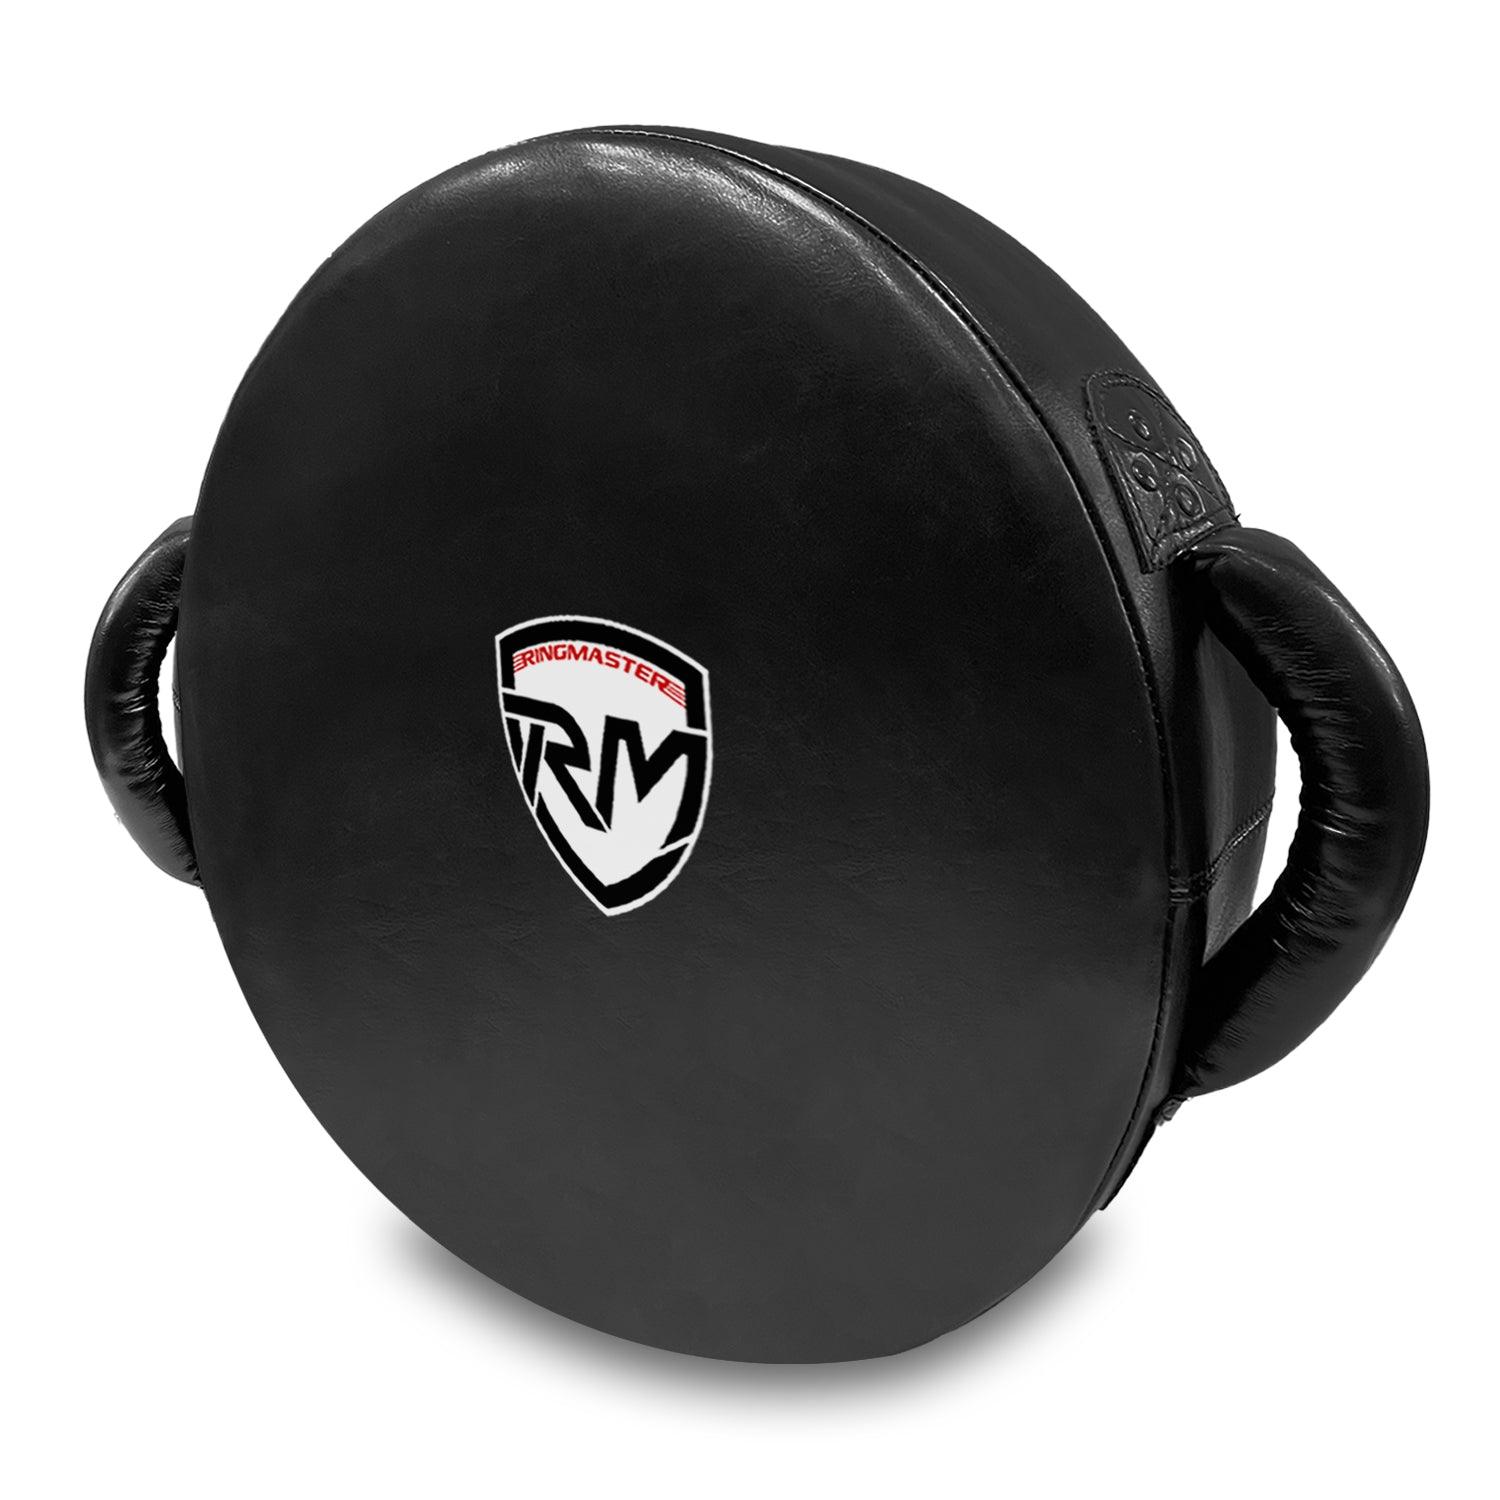 RingMaster Sports Round Punch Kick Shield Synthetic Leather Black - RINGMASTER SPORTS - Made For Champions